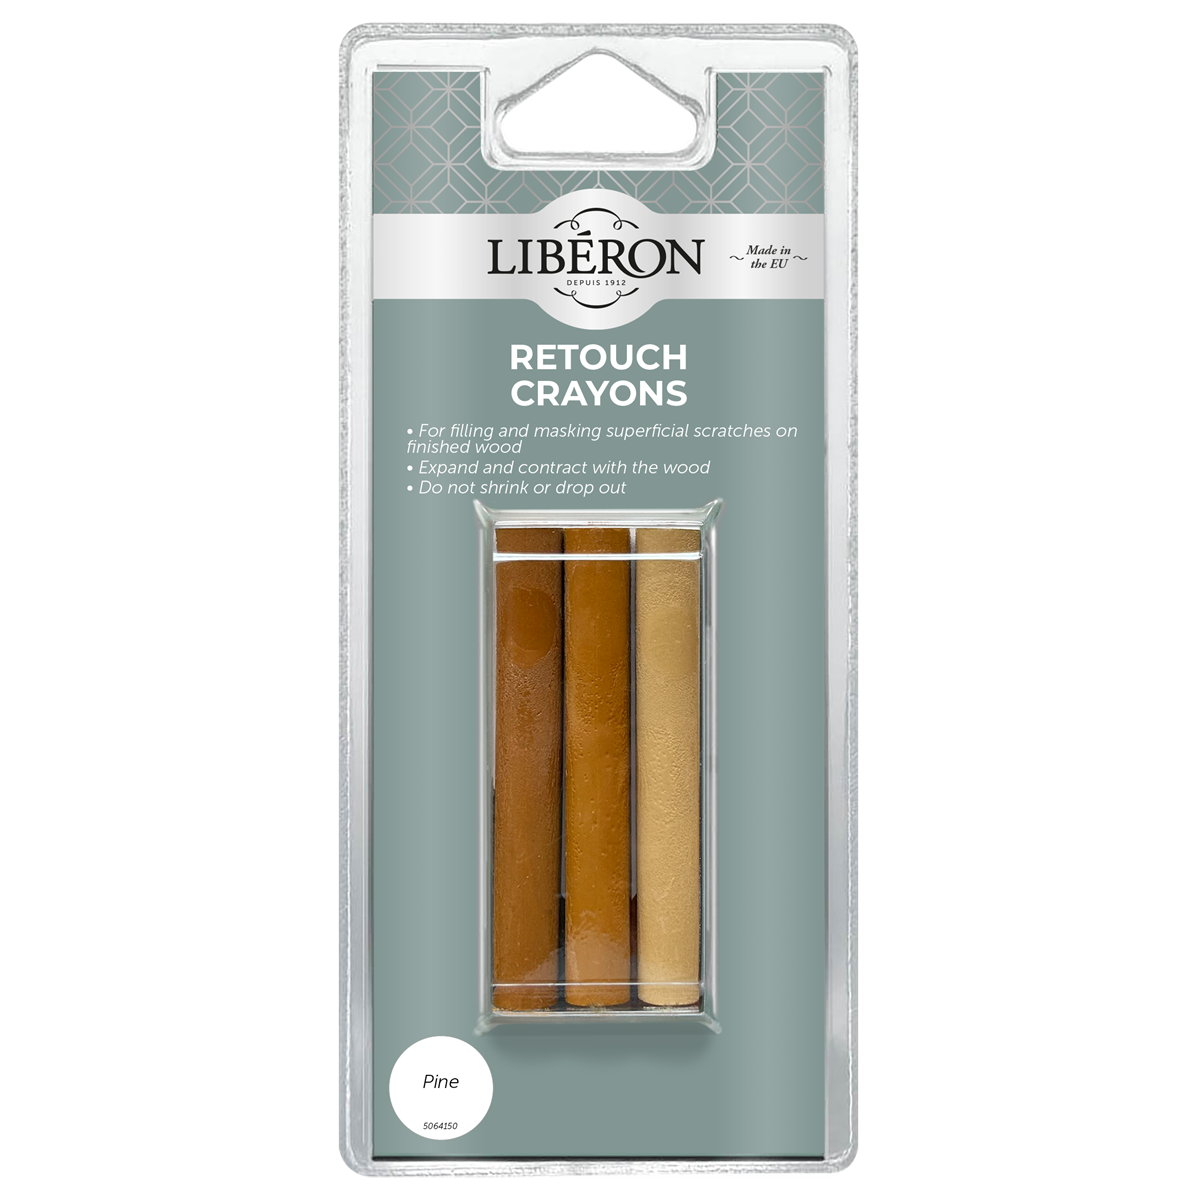 Liberon Retouch Crayons Pine Pack of 3